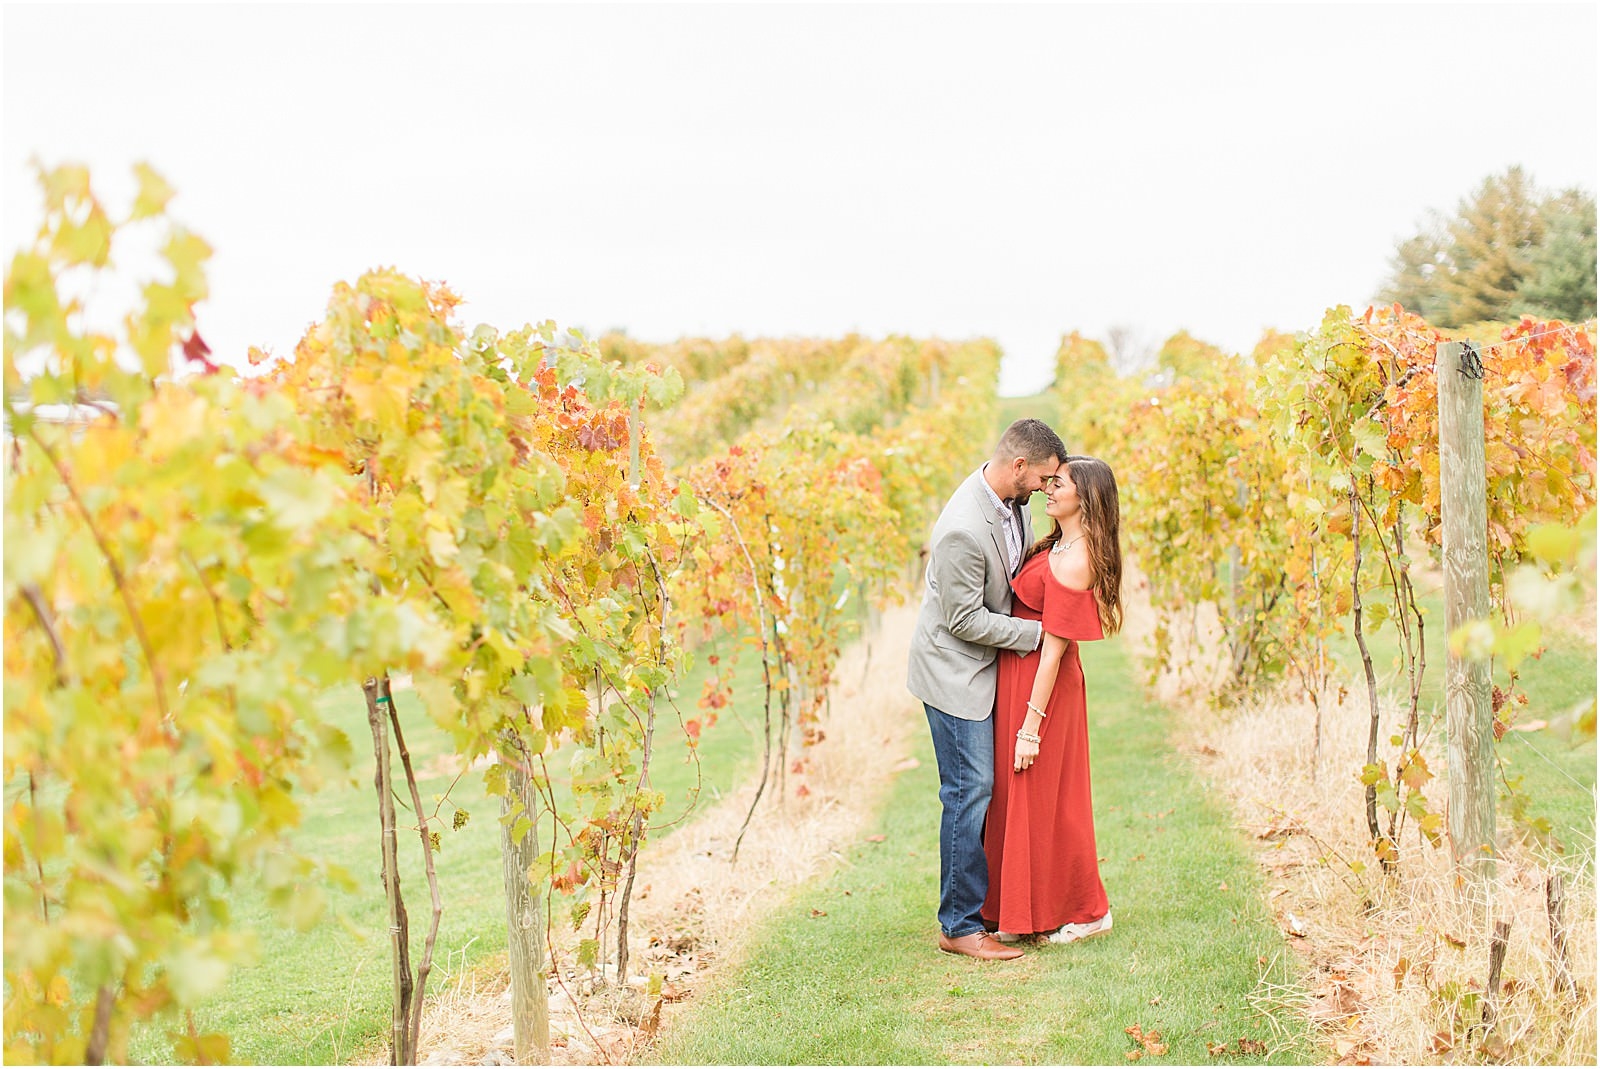 A Fall Oliver Winery Engagement Session | Sally and Andrew | Bret and Brandie Photography 0025.jpg